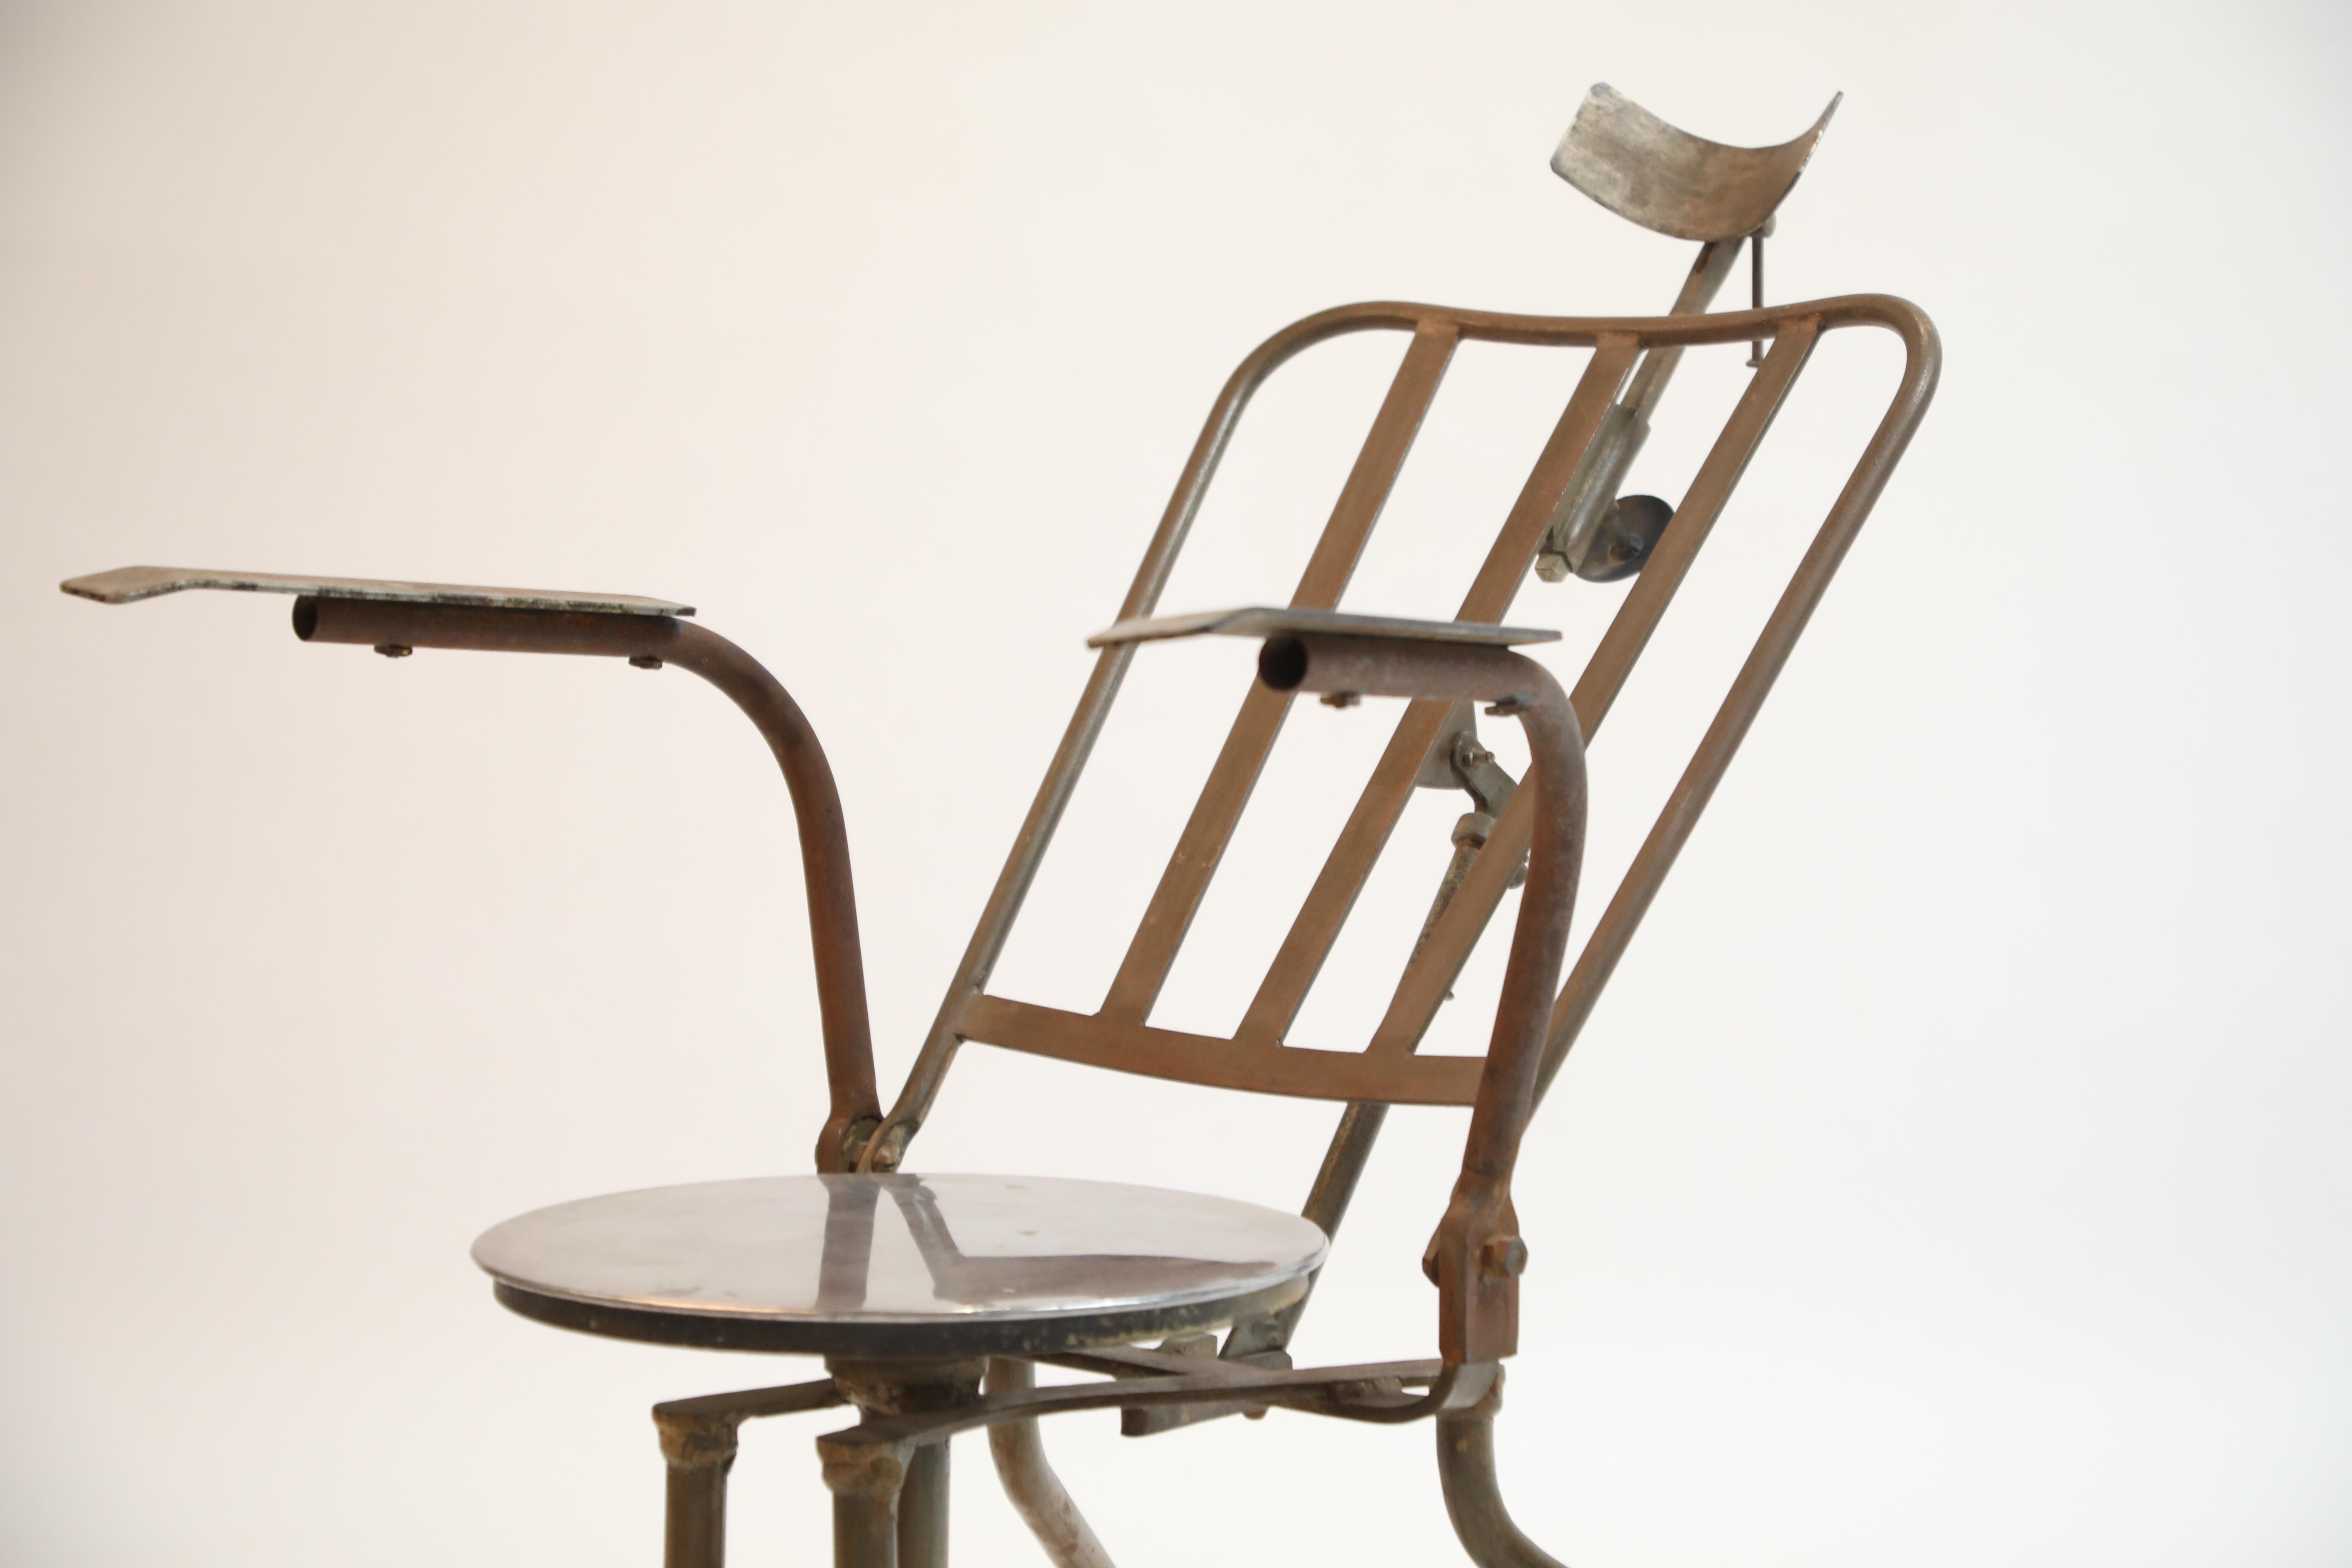 Metal Industrial Steel Dentist Chair or Sculpture from Brazil, circa 1900s